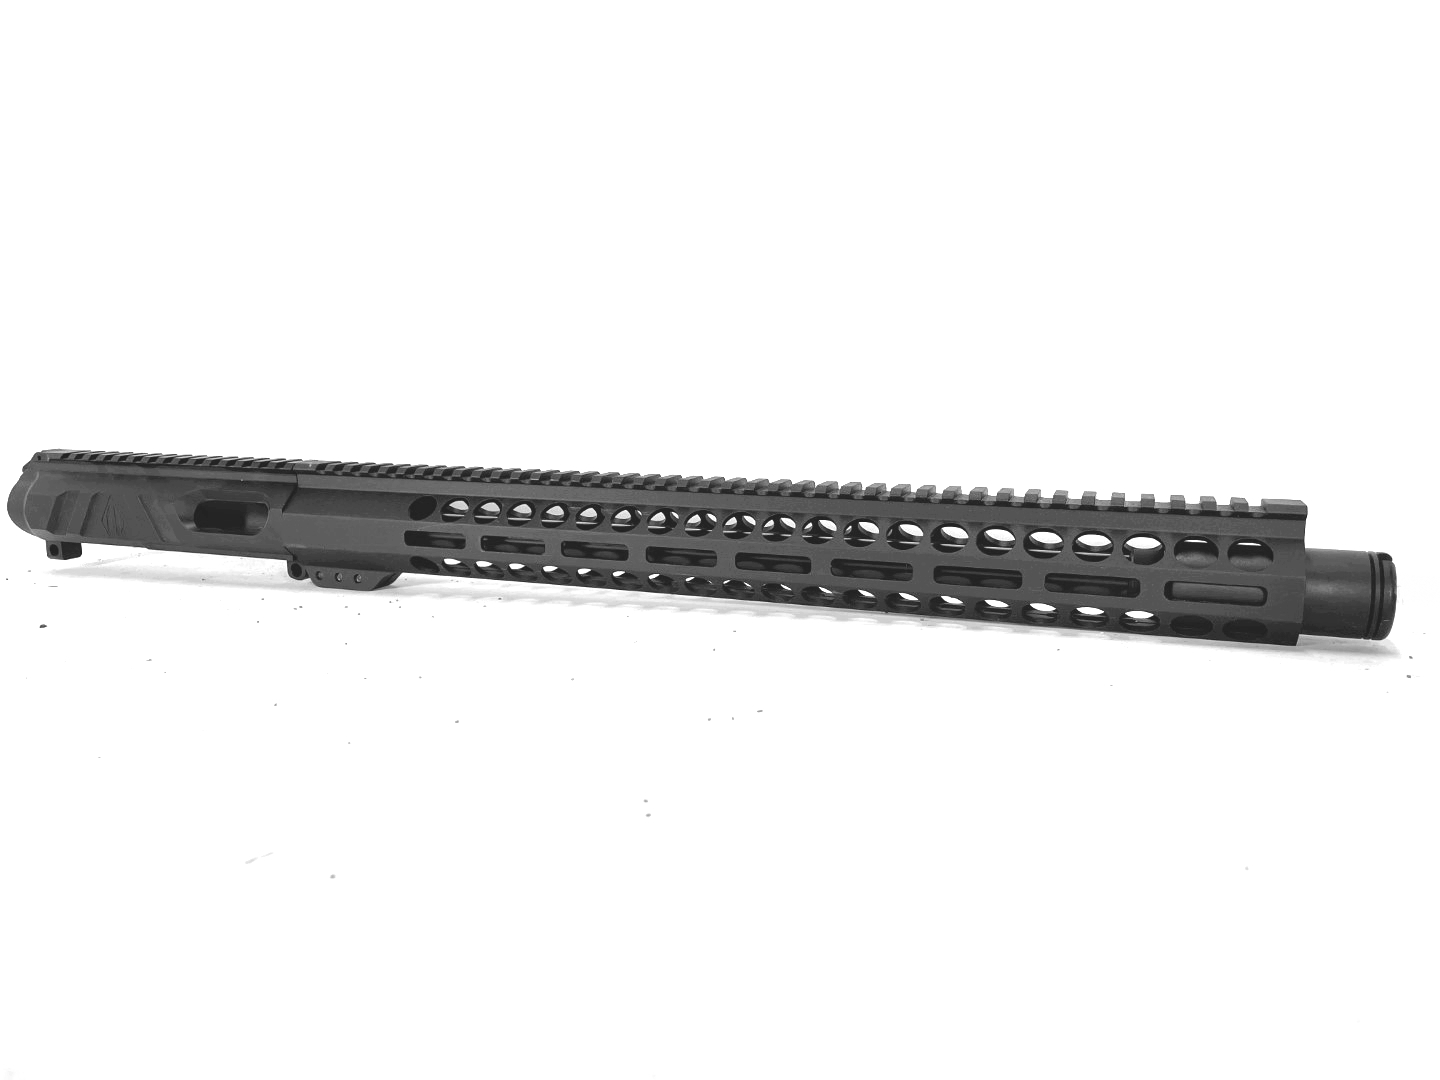 16 inch AR-15 Non Reciprocating 9mm Pistol Caliber Melonite Upper with Flash Can